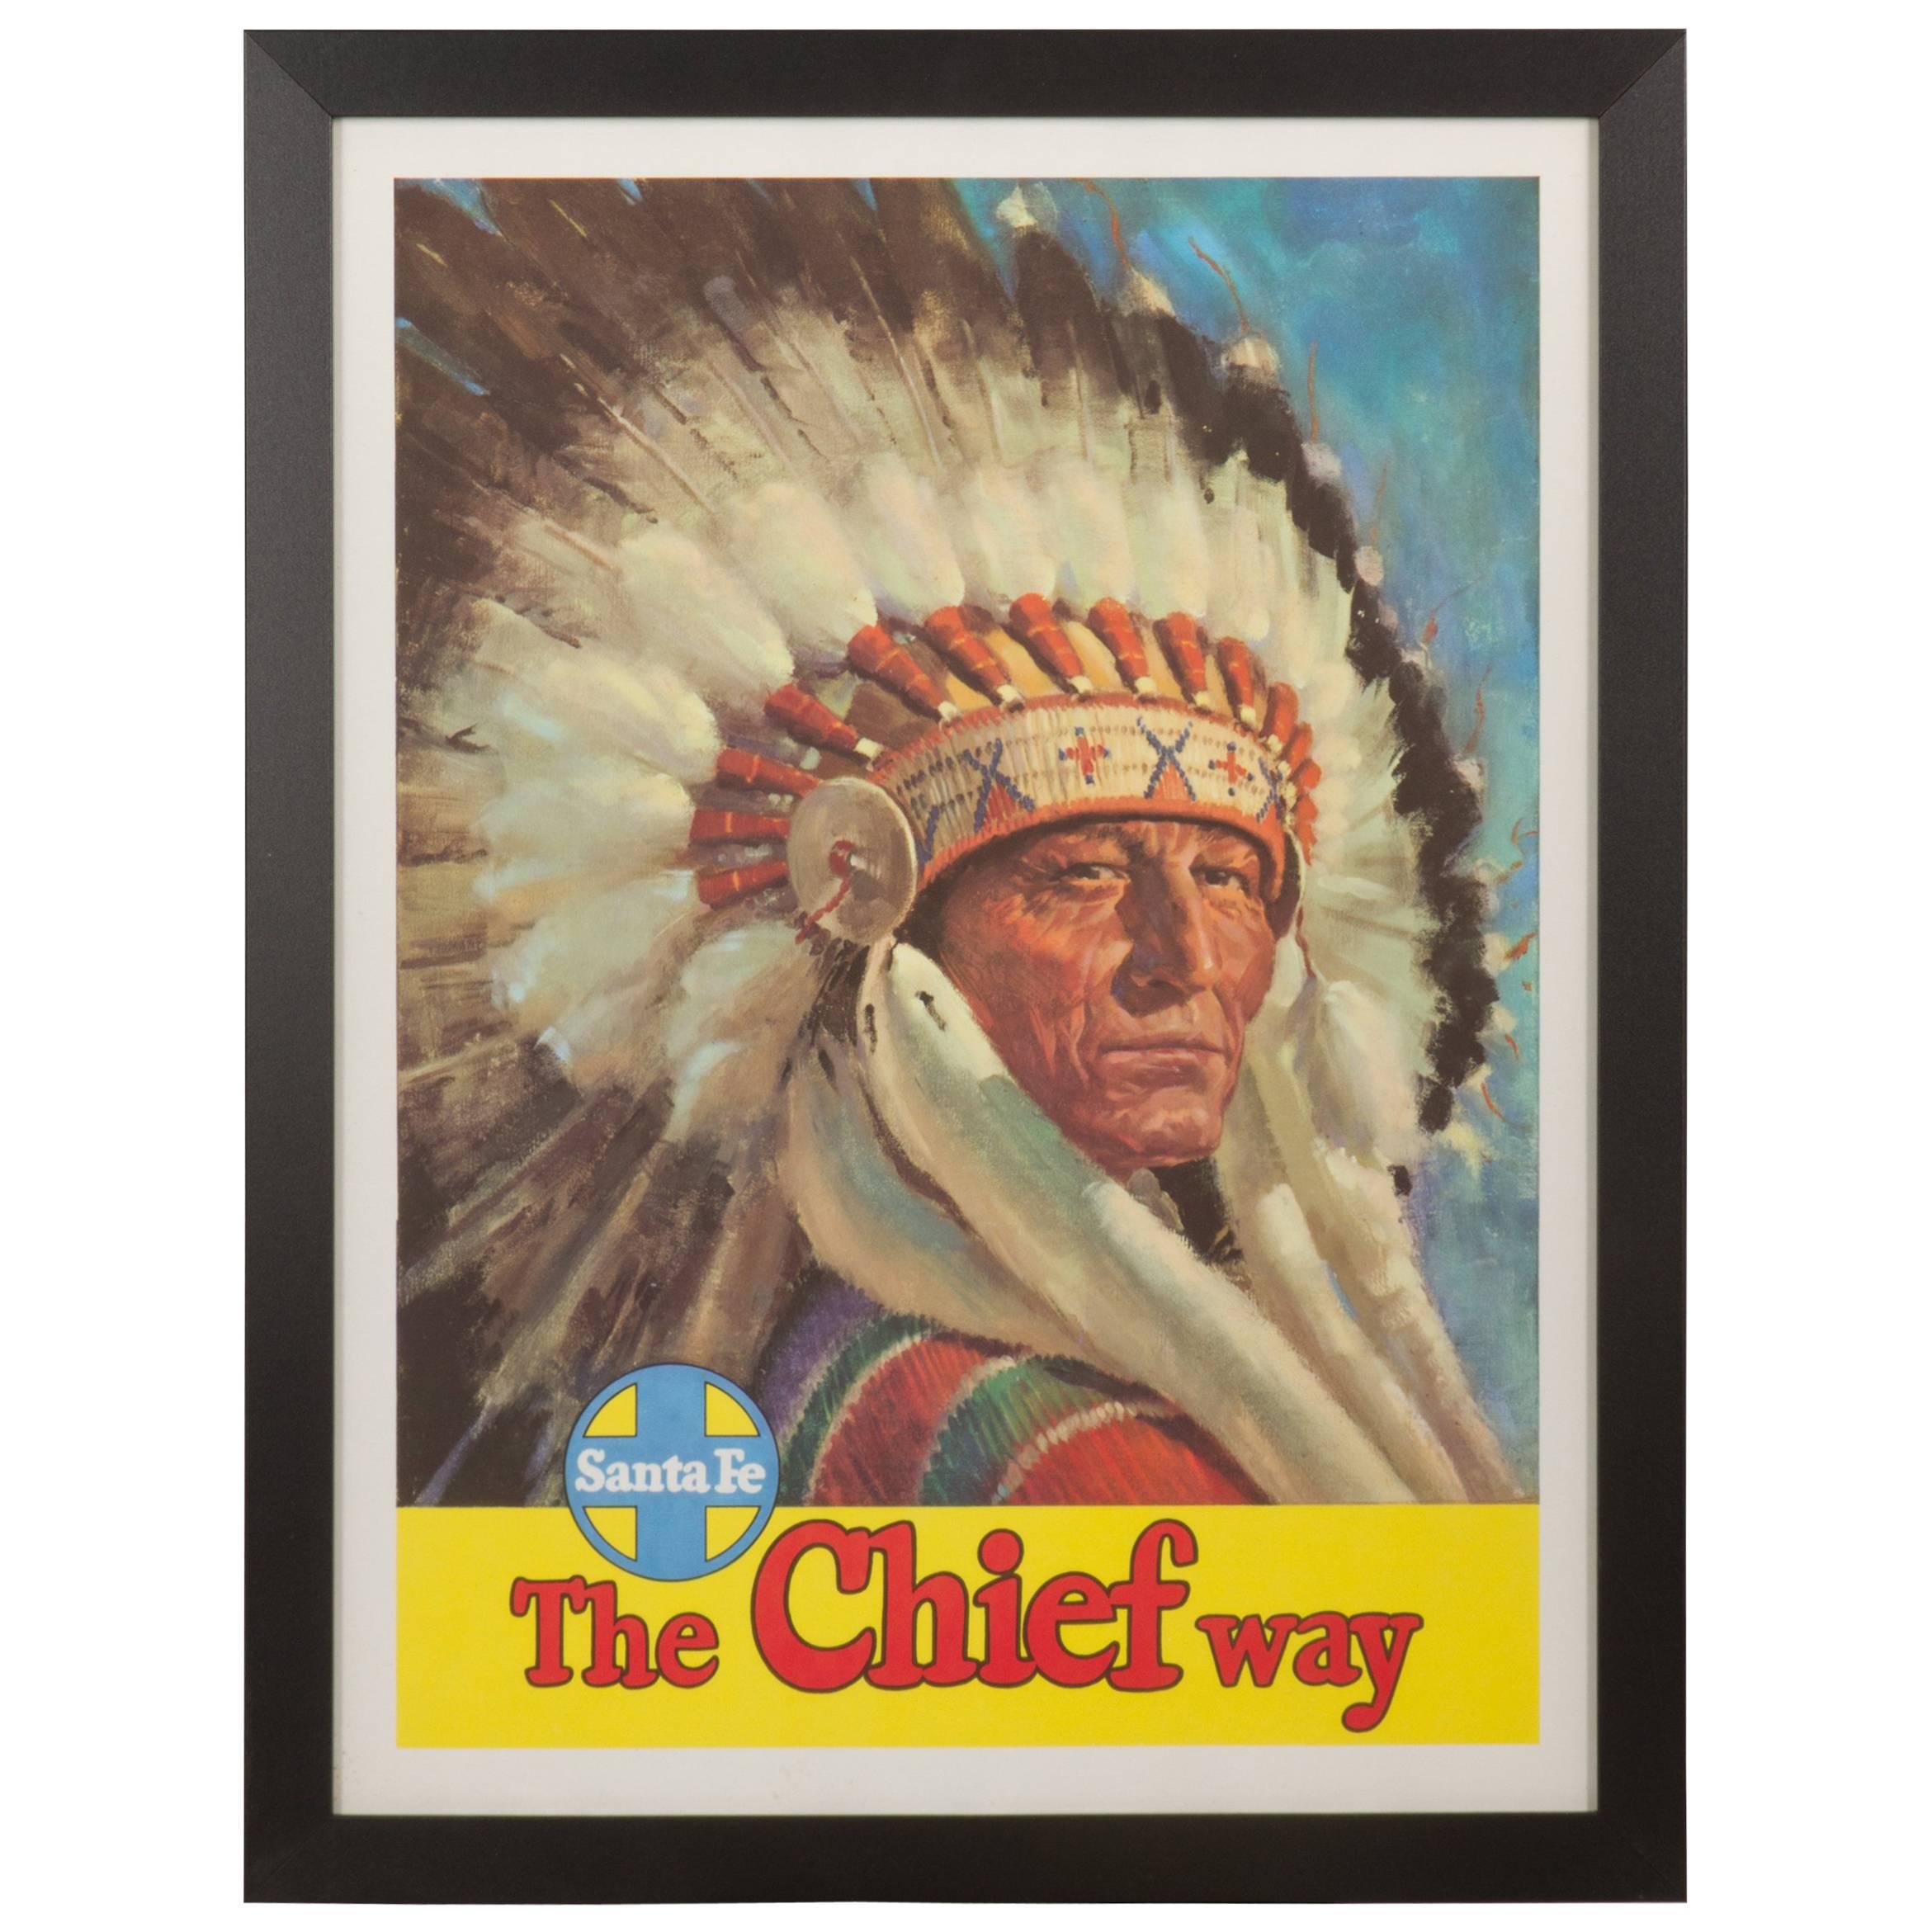 Original Sante Fe Travel Poster "The Chief Way" For Sale